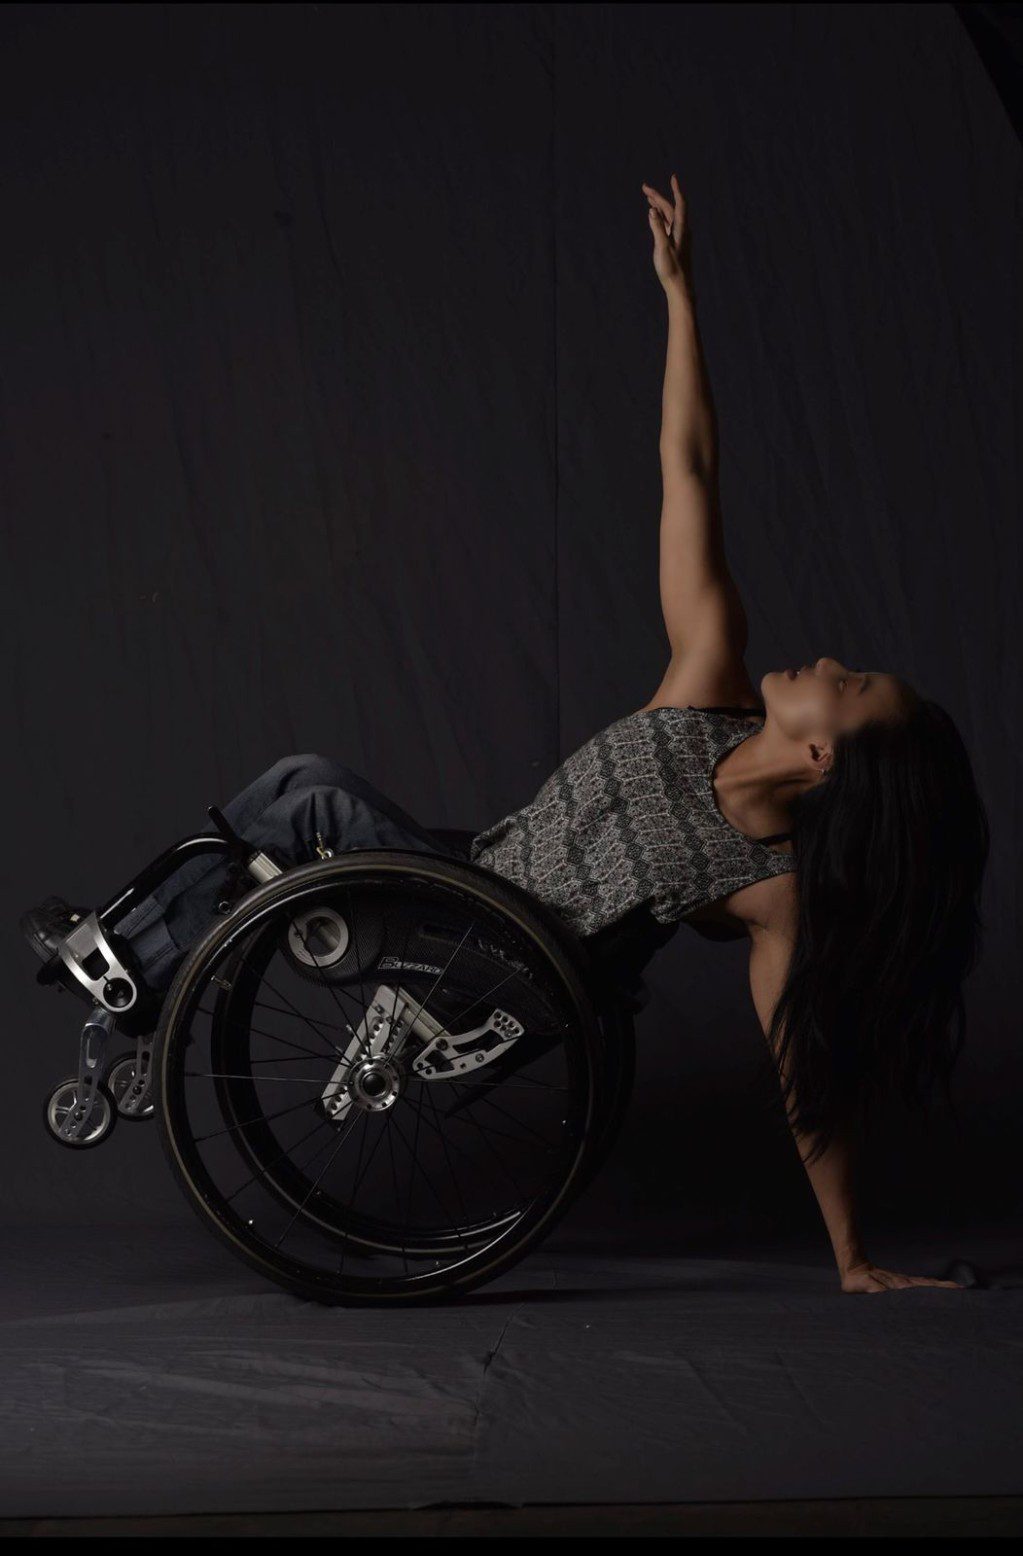 Julie leans back in her manual wheelchair in a wheelie, supporting herself with one hand as she reaches her other arm up to the sky. She poses against a black background, wearing a grey top.